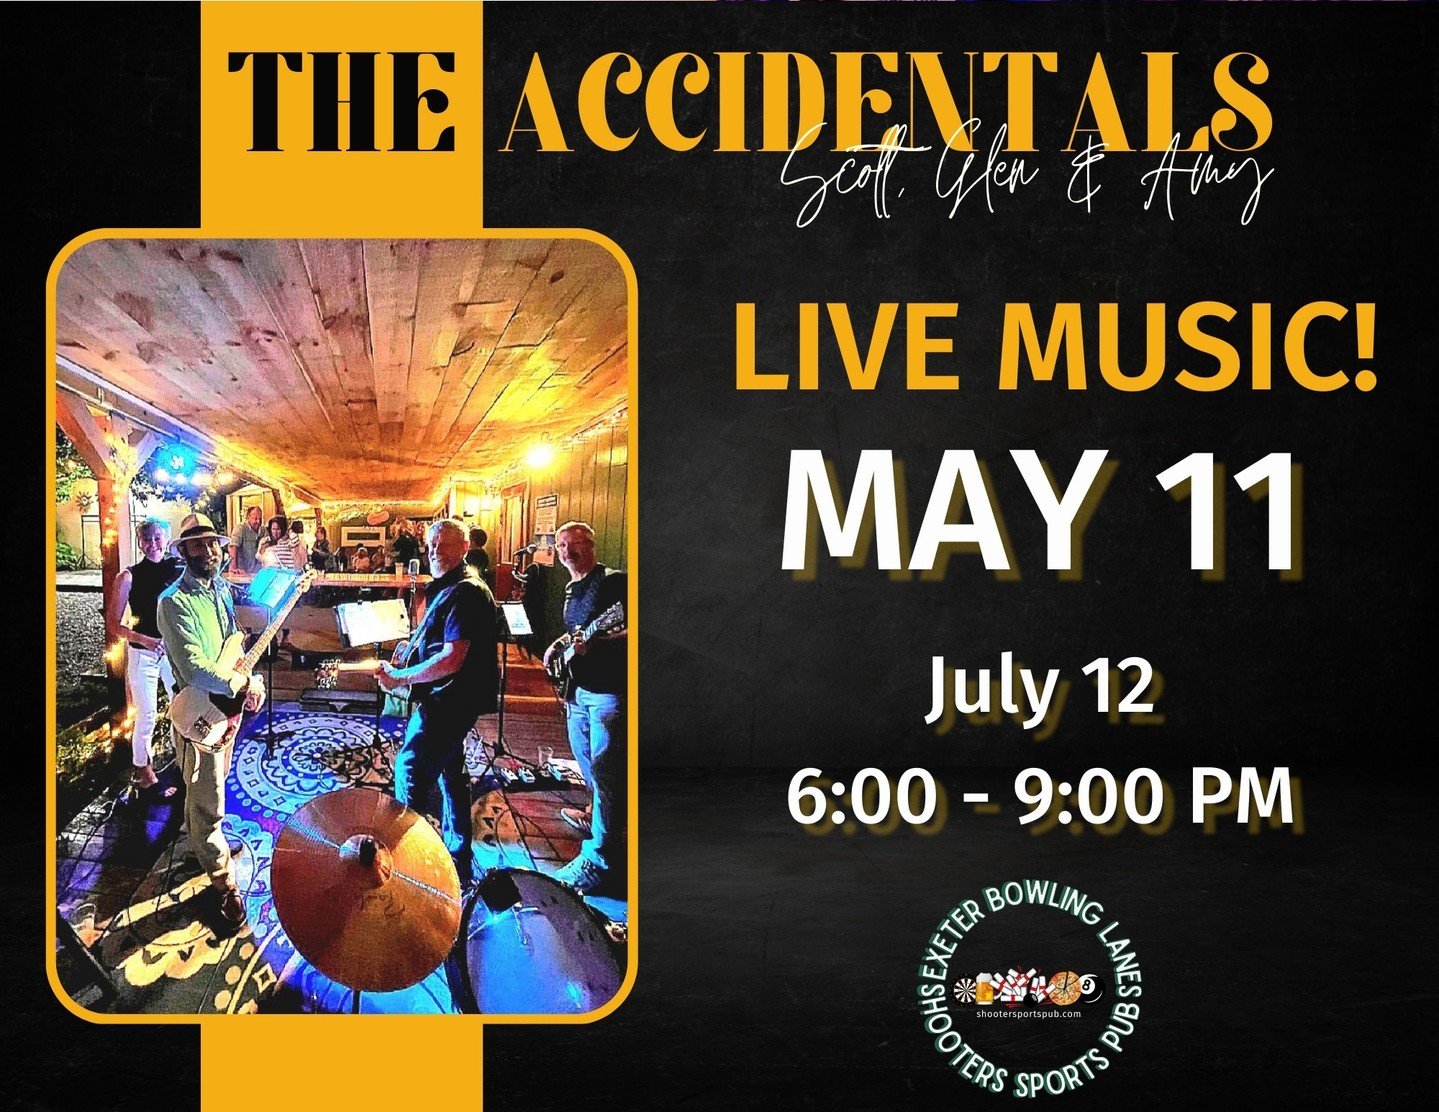 🌟🎶 Saturday 5/11, The Accidentals are bringing the vibe to Shooters' beer garden! ⁠
Unique tunes under the stars &ndash; you don&rsquo;t want to miss it!⁠
#TheAccidentalsLive #ShootersBeerGarden⁠